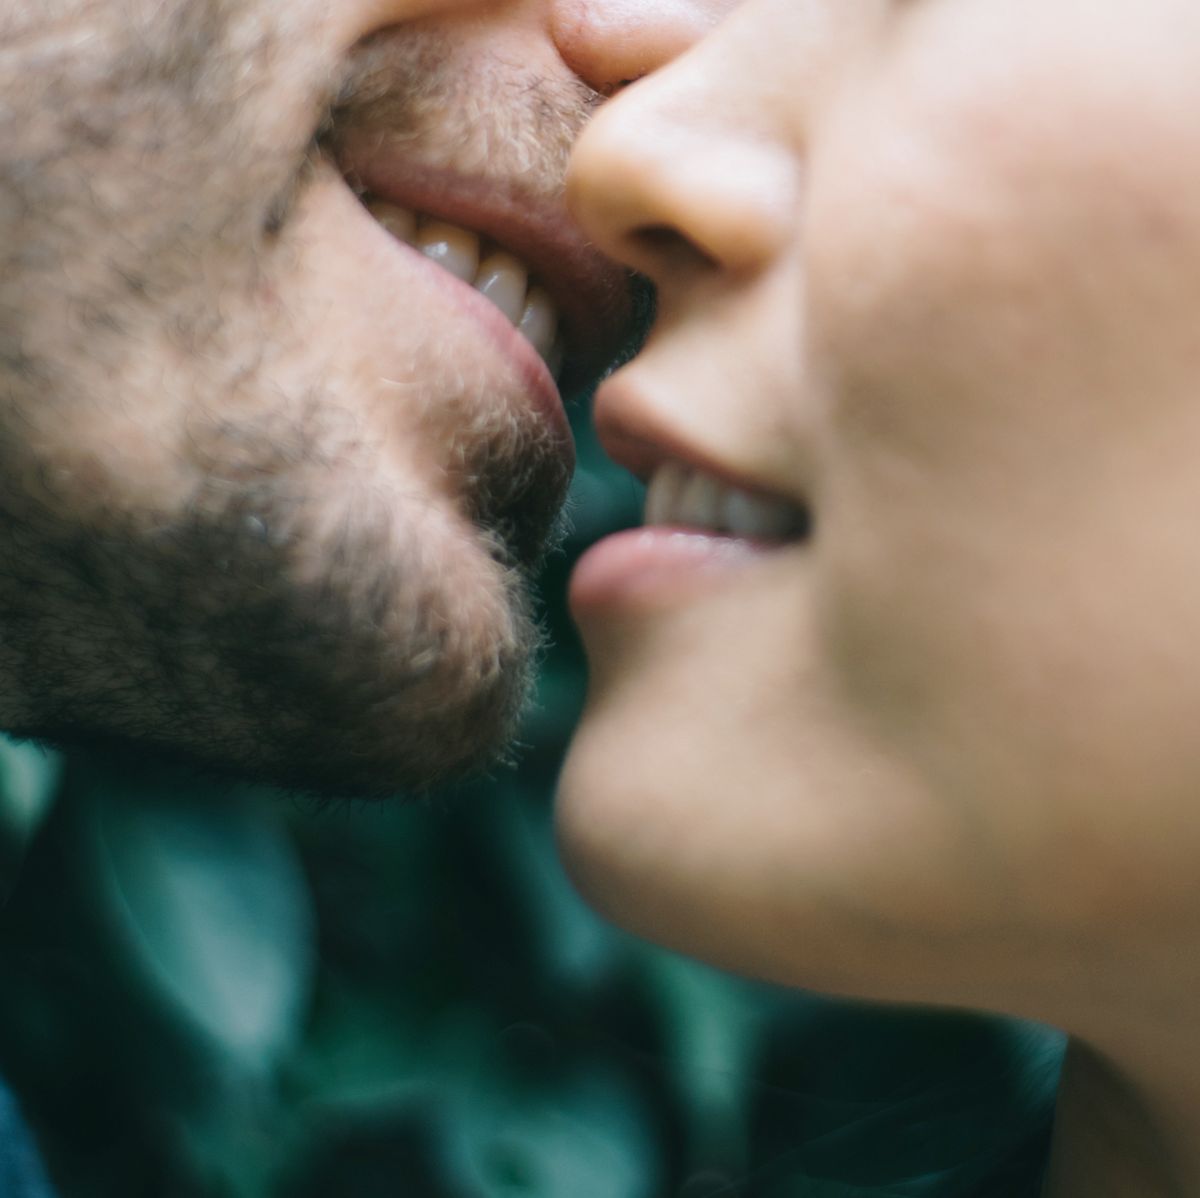 10 Girls Get Real About Their First Kisses With Girls